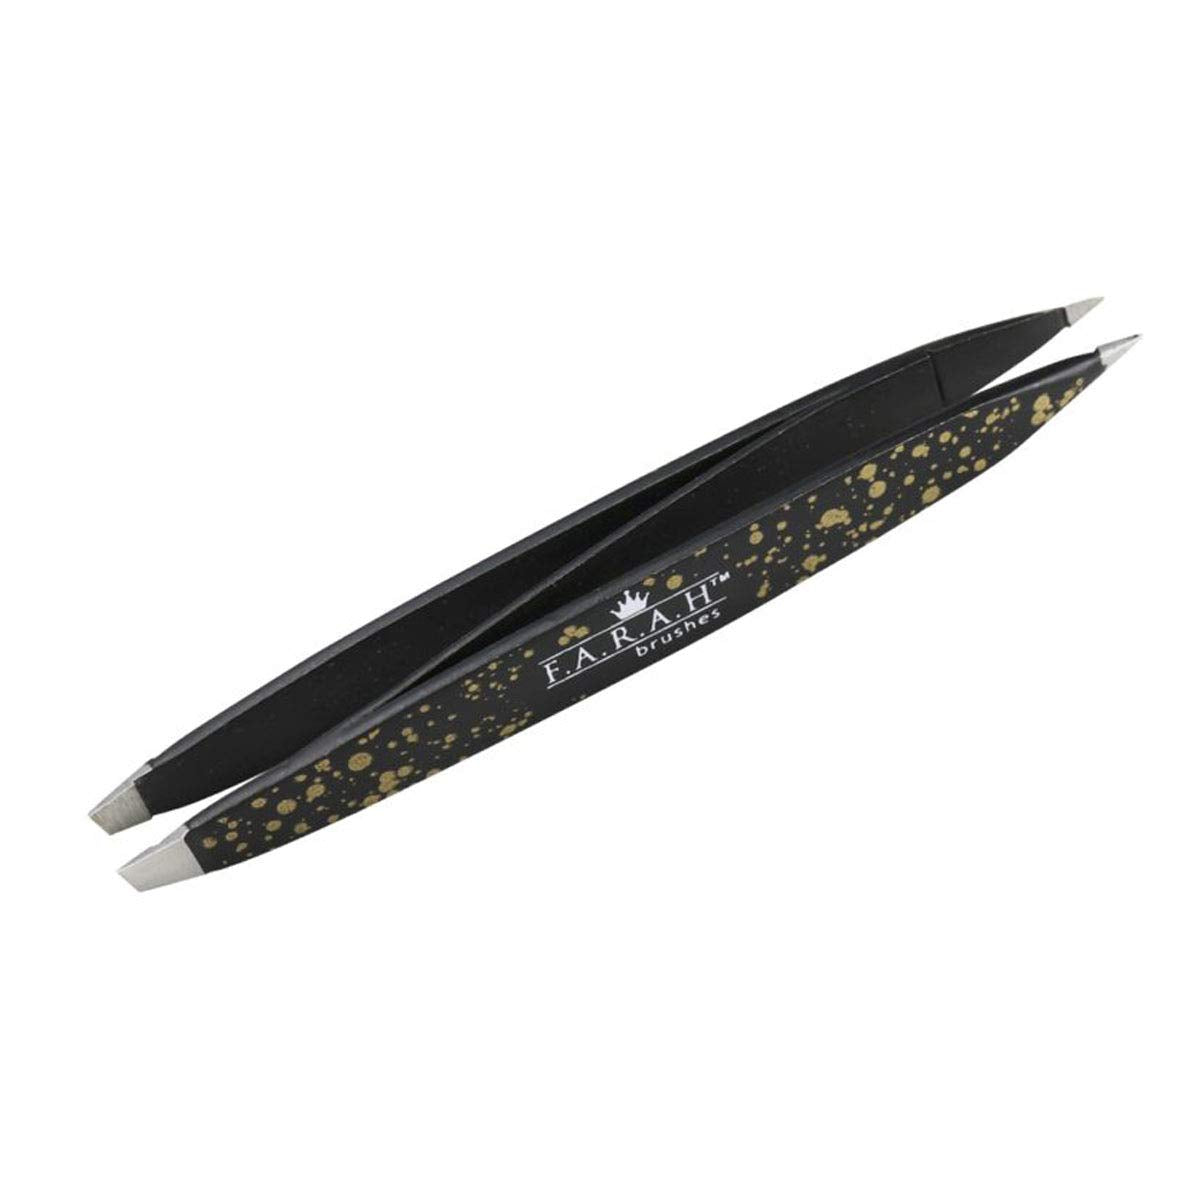 Z-Tweeze Professional Galaxy Gold Stainless Steel Dual Ended Precision Tweezers by F.A.R.A.H.